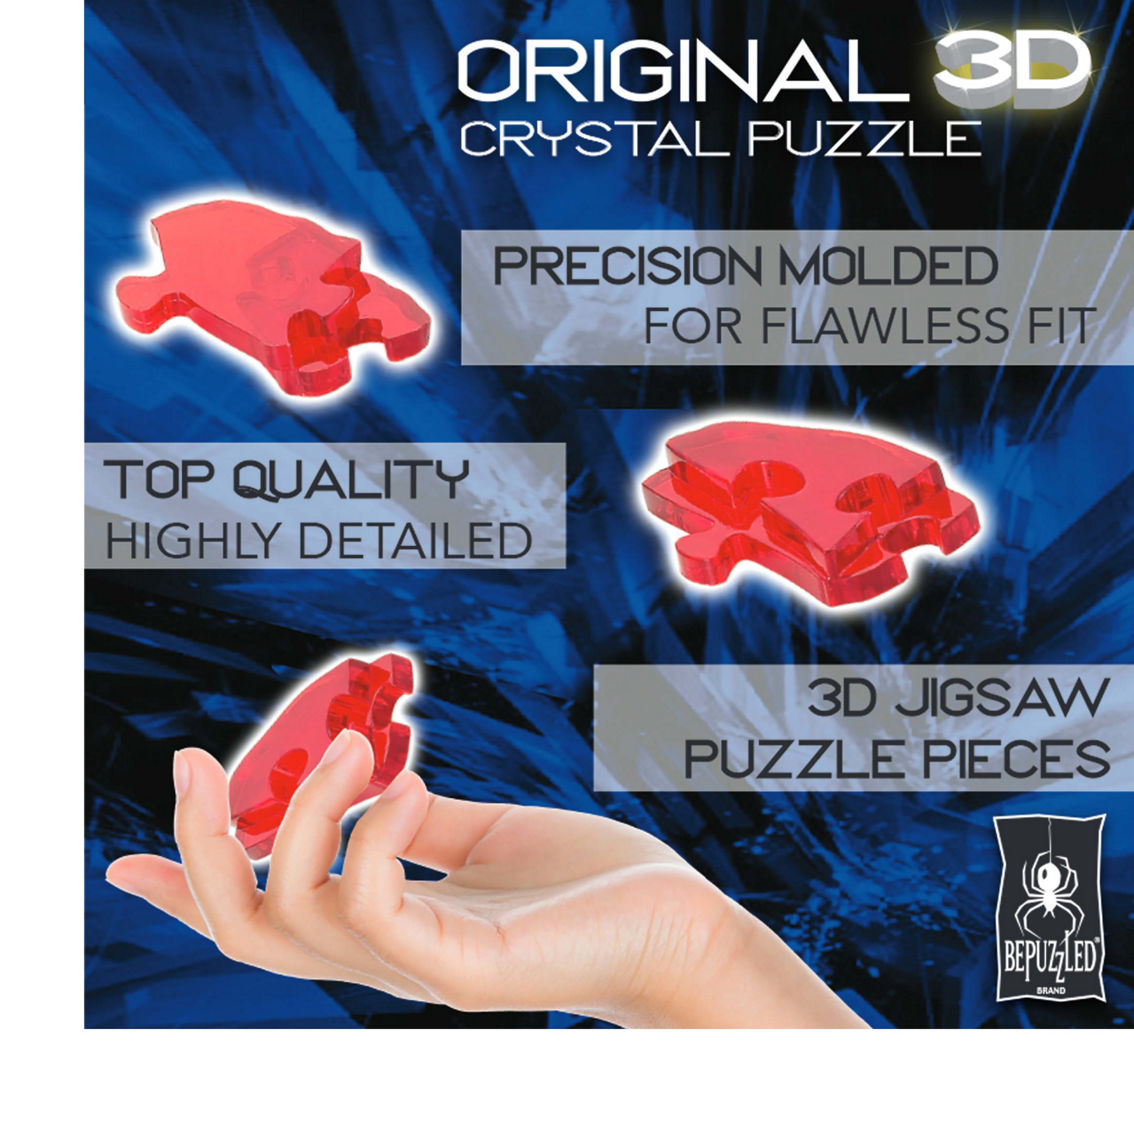 BePuzzled 3D Crystal Puzzle Disney Winnie the Pooh and Piglet (Multi-color): 57 Pcs - Image 5 of 5